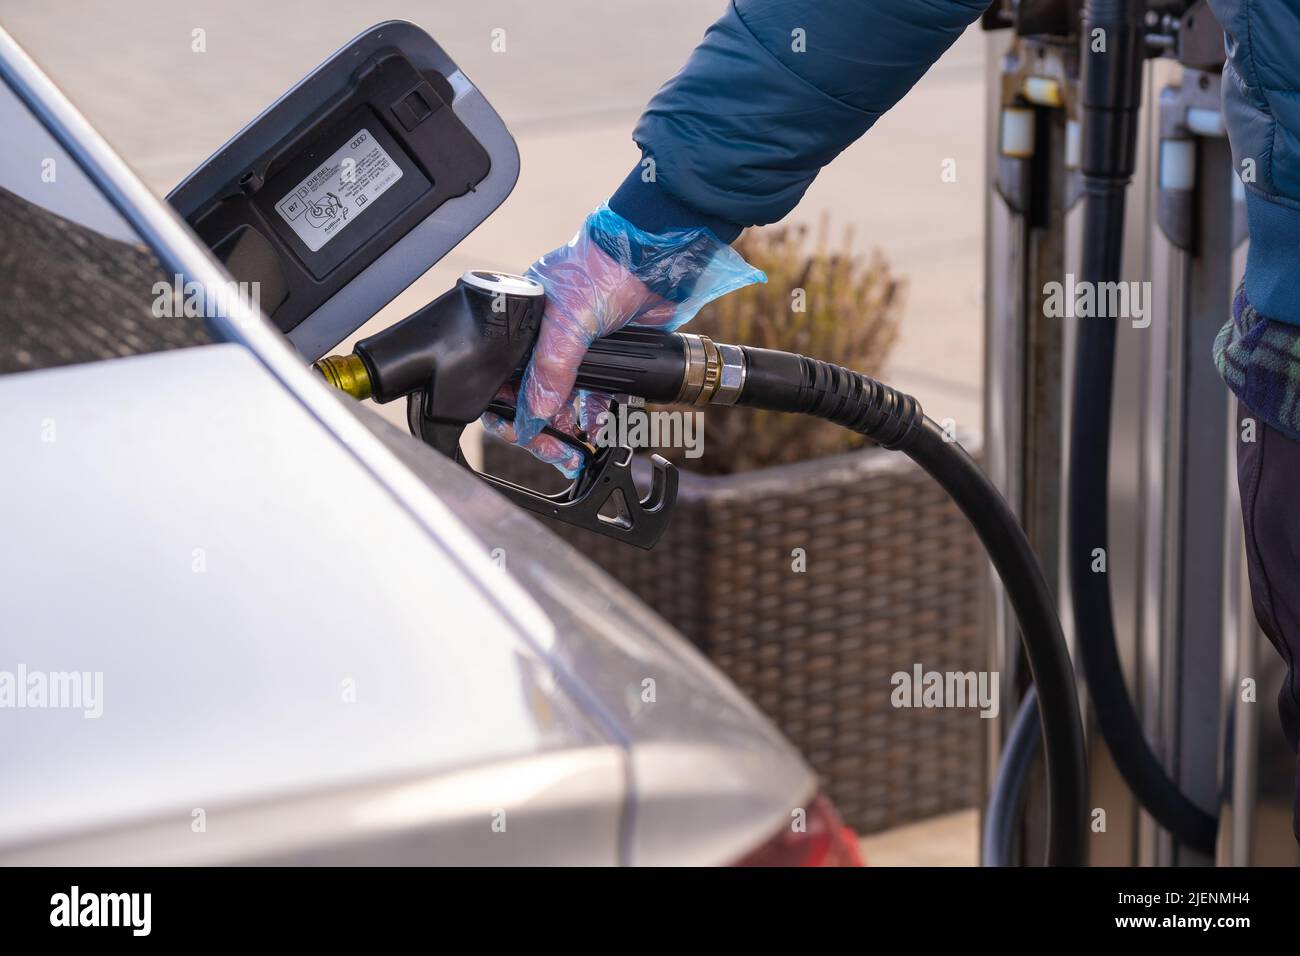 Diesel.Fuel price in Europe. Refueling the car.Refueling pistol in the hands of a man in a blue glove.Car at a gas station. Silver car, refueling Stock Photo